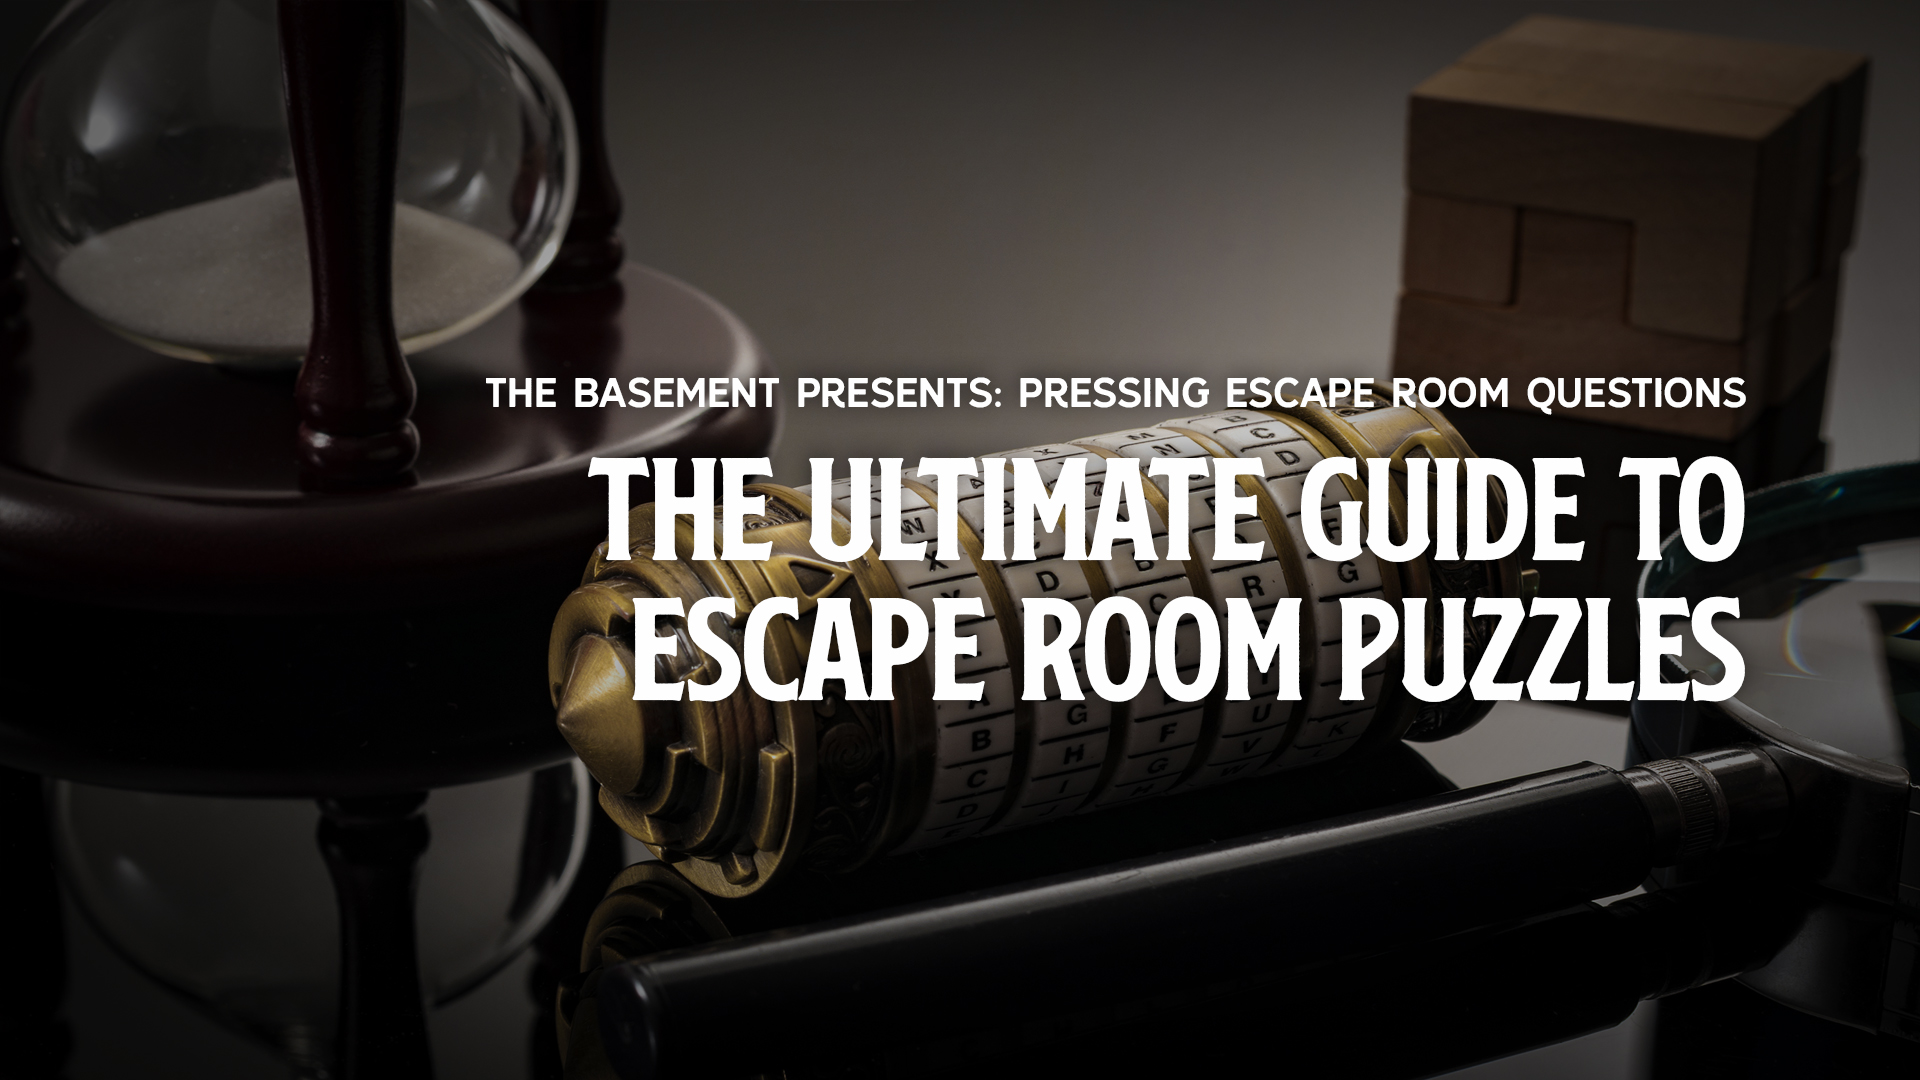 The Ultimate Guide To Escape Room Puzzles